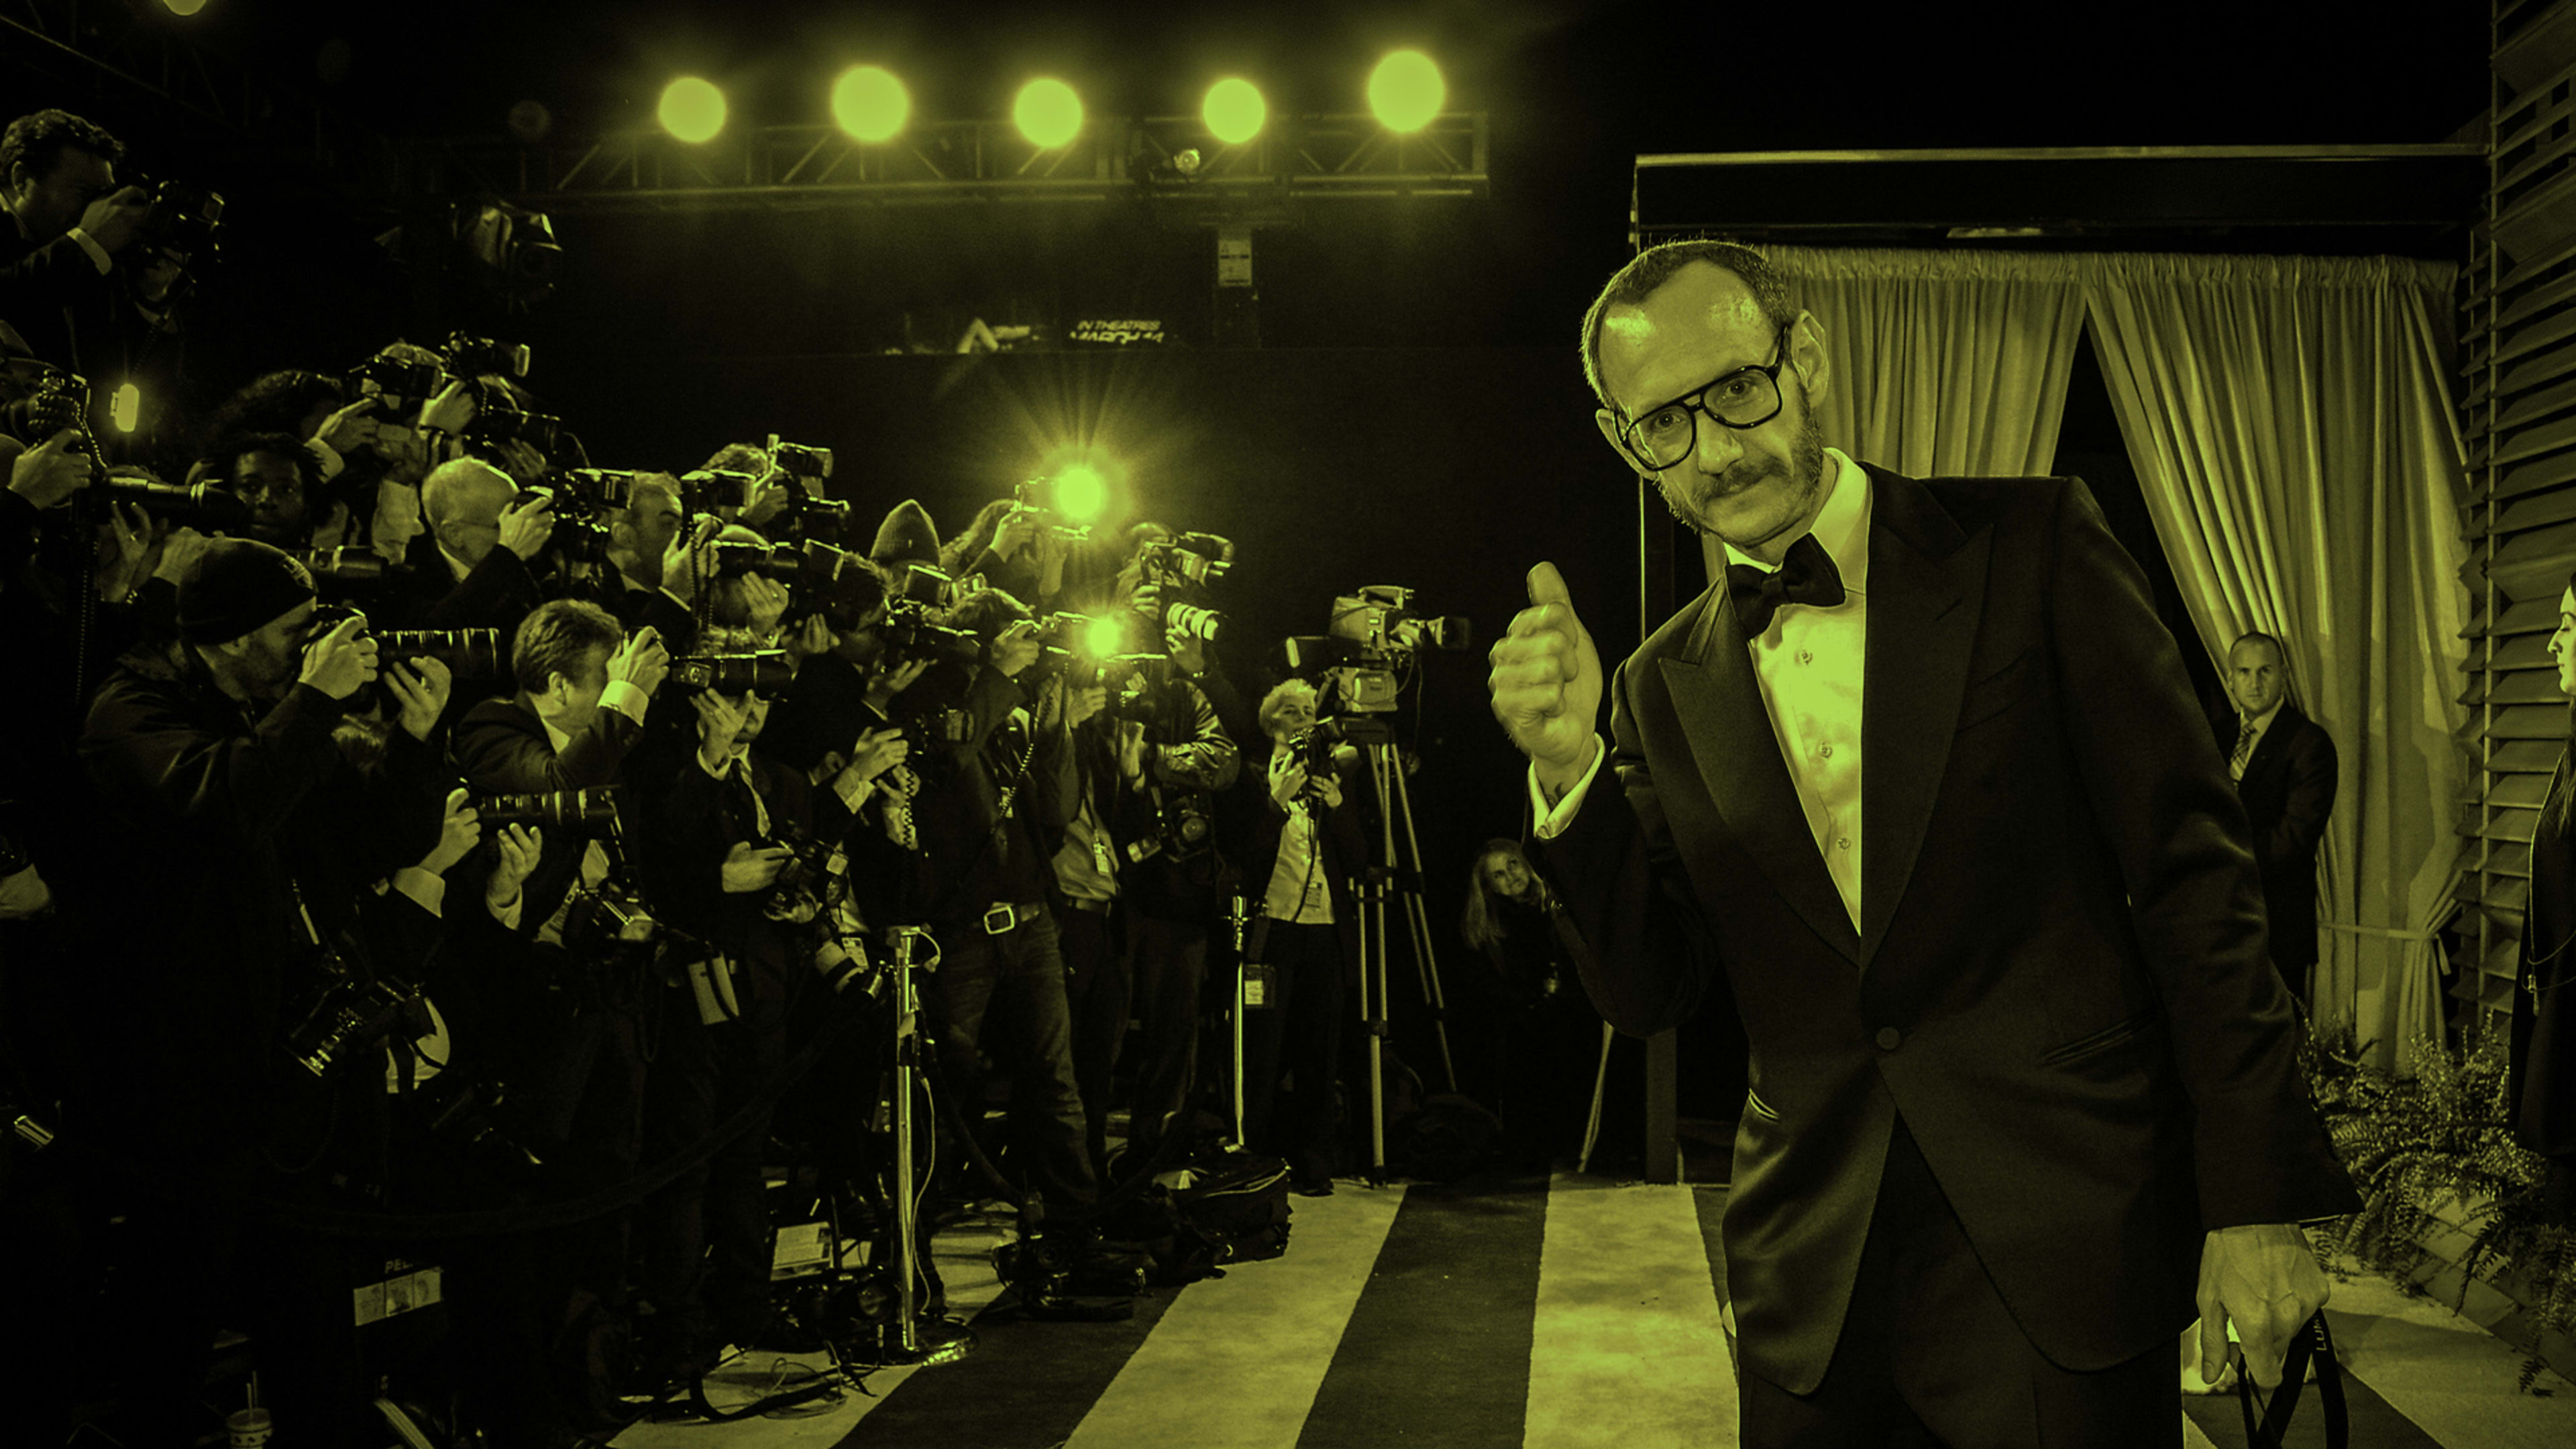 Terry Richardson barred from working with Condé Nast publications